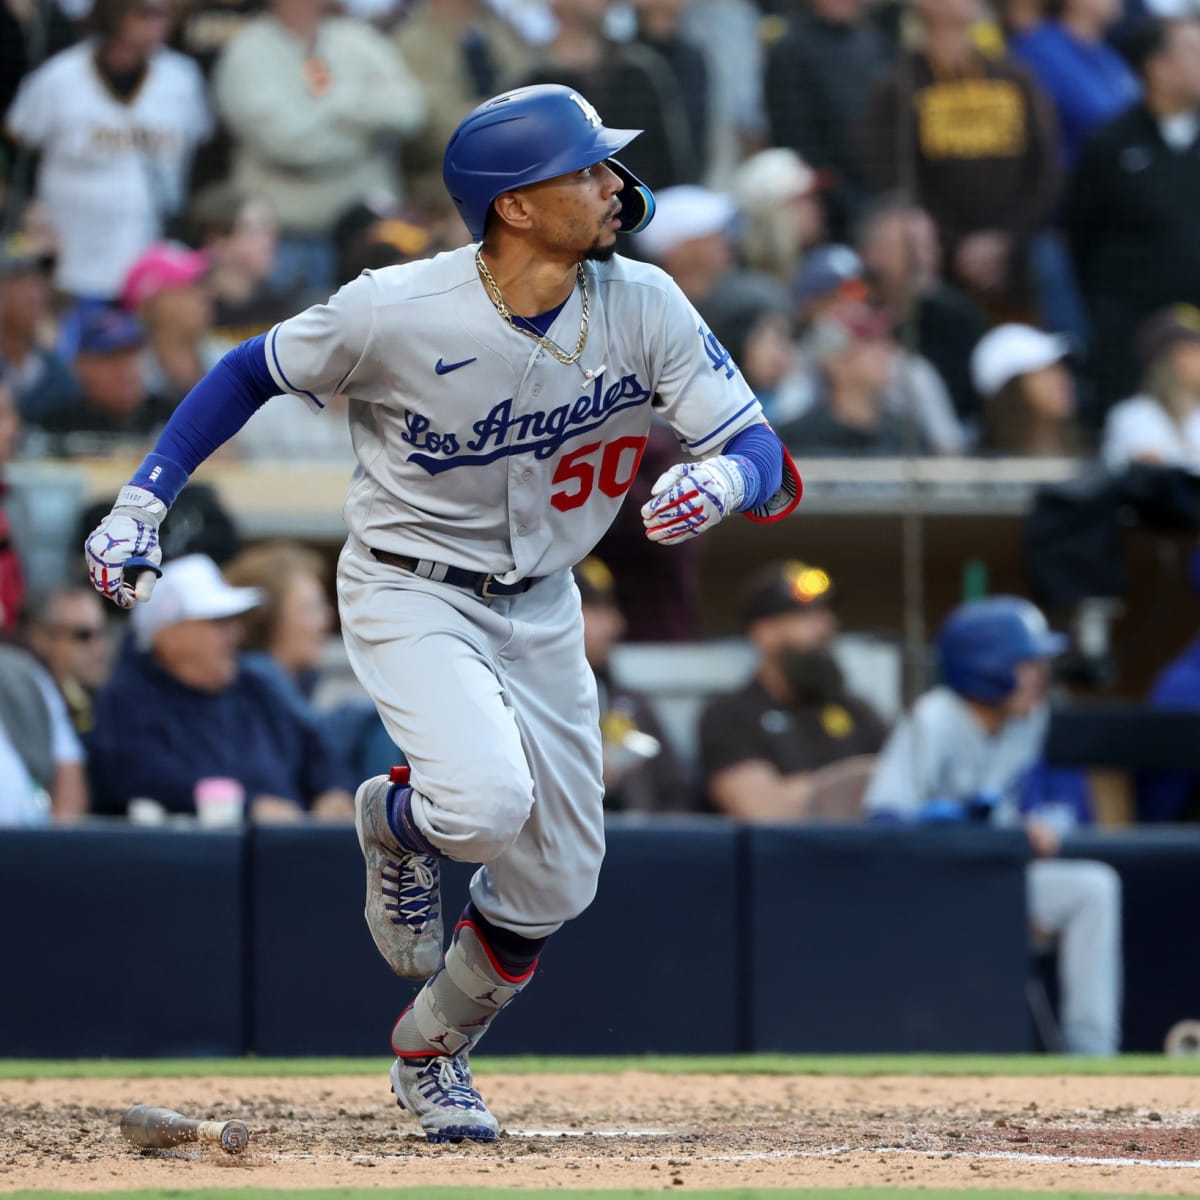 Dodgers: Six LA Players Included on MLB's Top 50 List - Inside the Dodgers